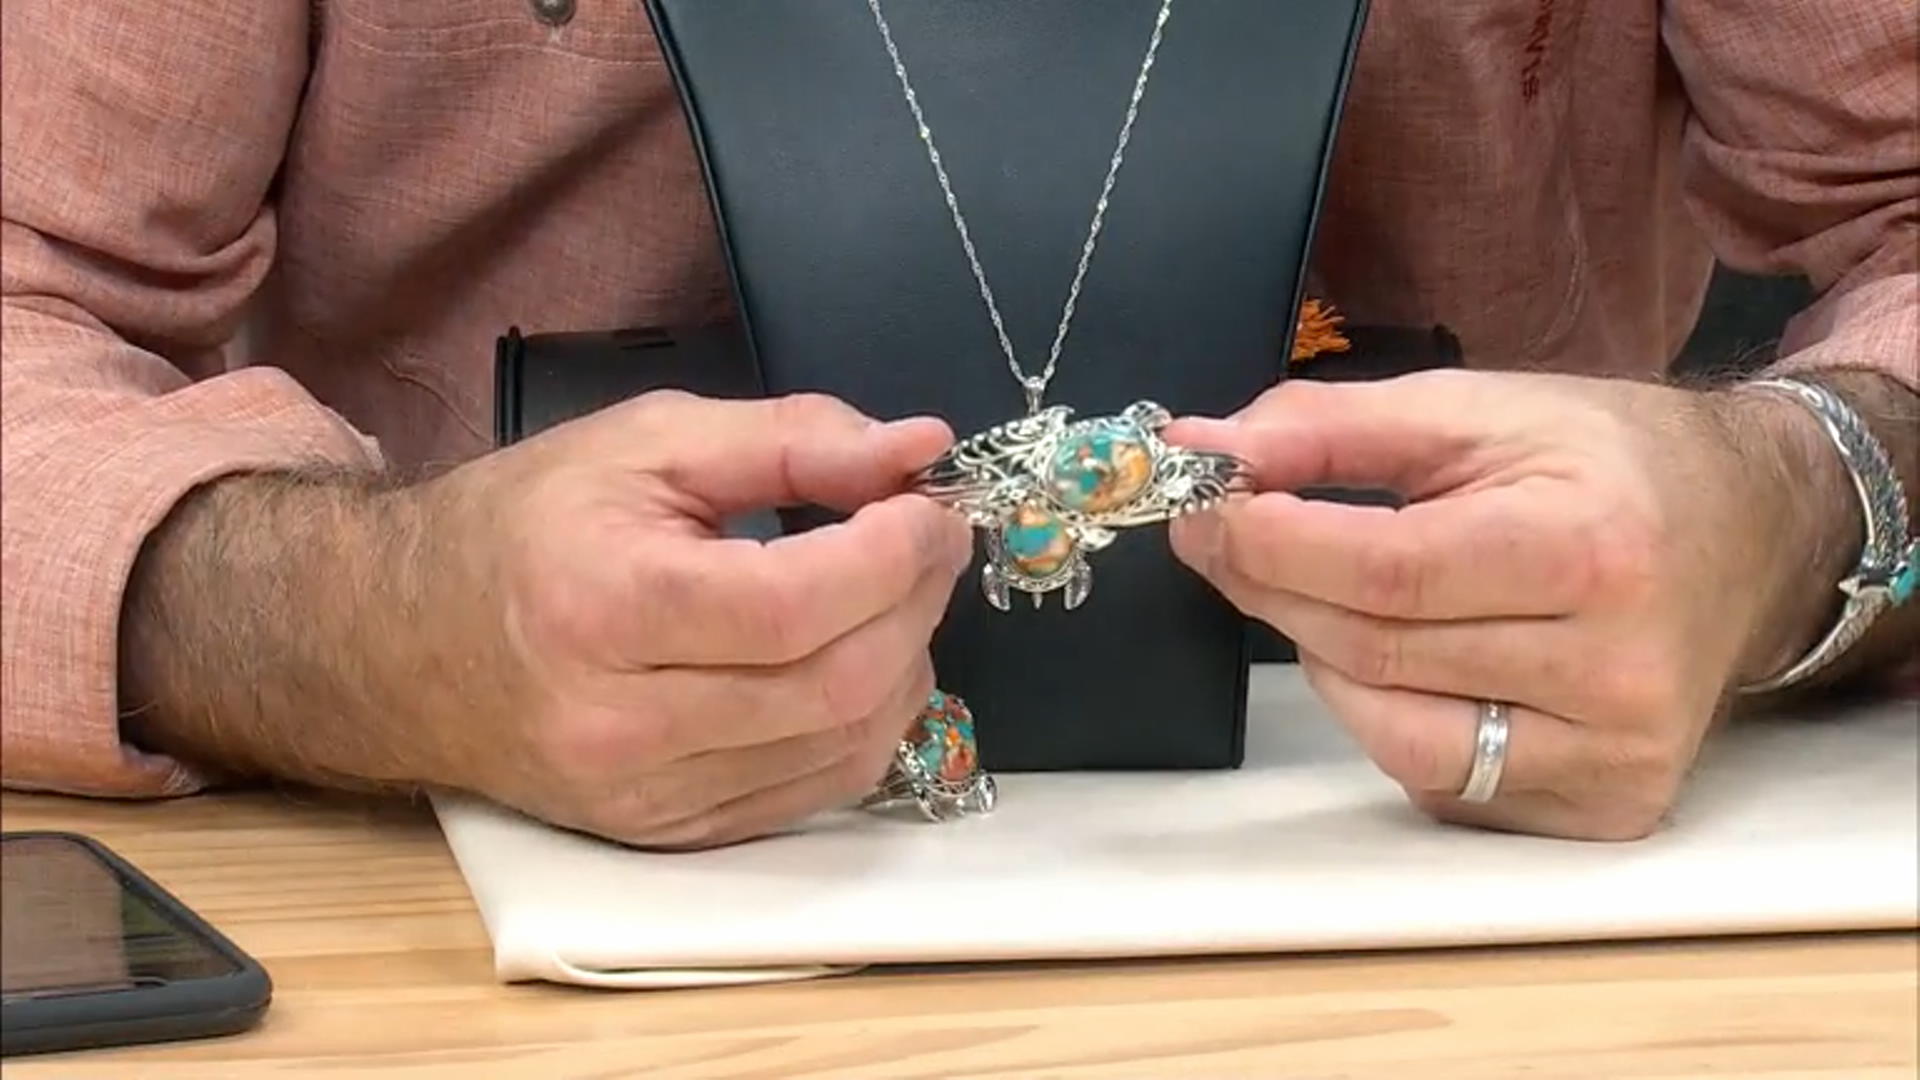 Blended Spiny Oyster Shell and Turquoise Rhodium Over Sterling Silver Turtle Cuff Video Thumbnail